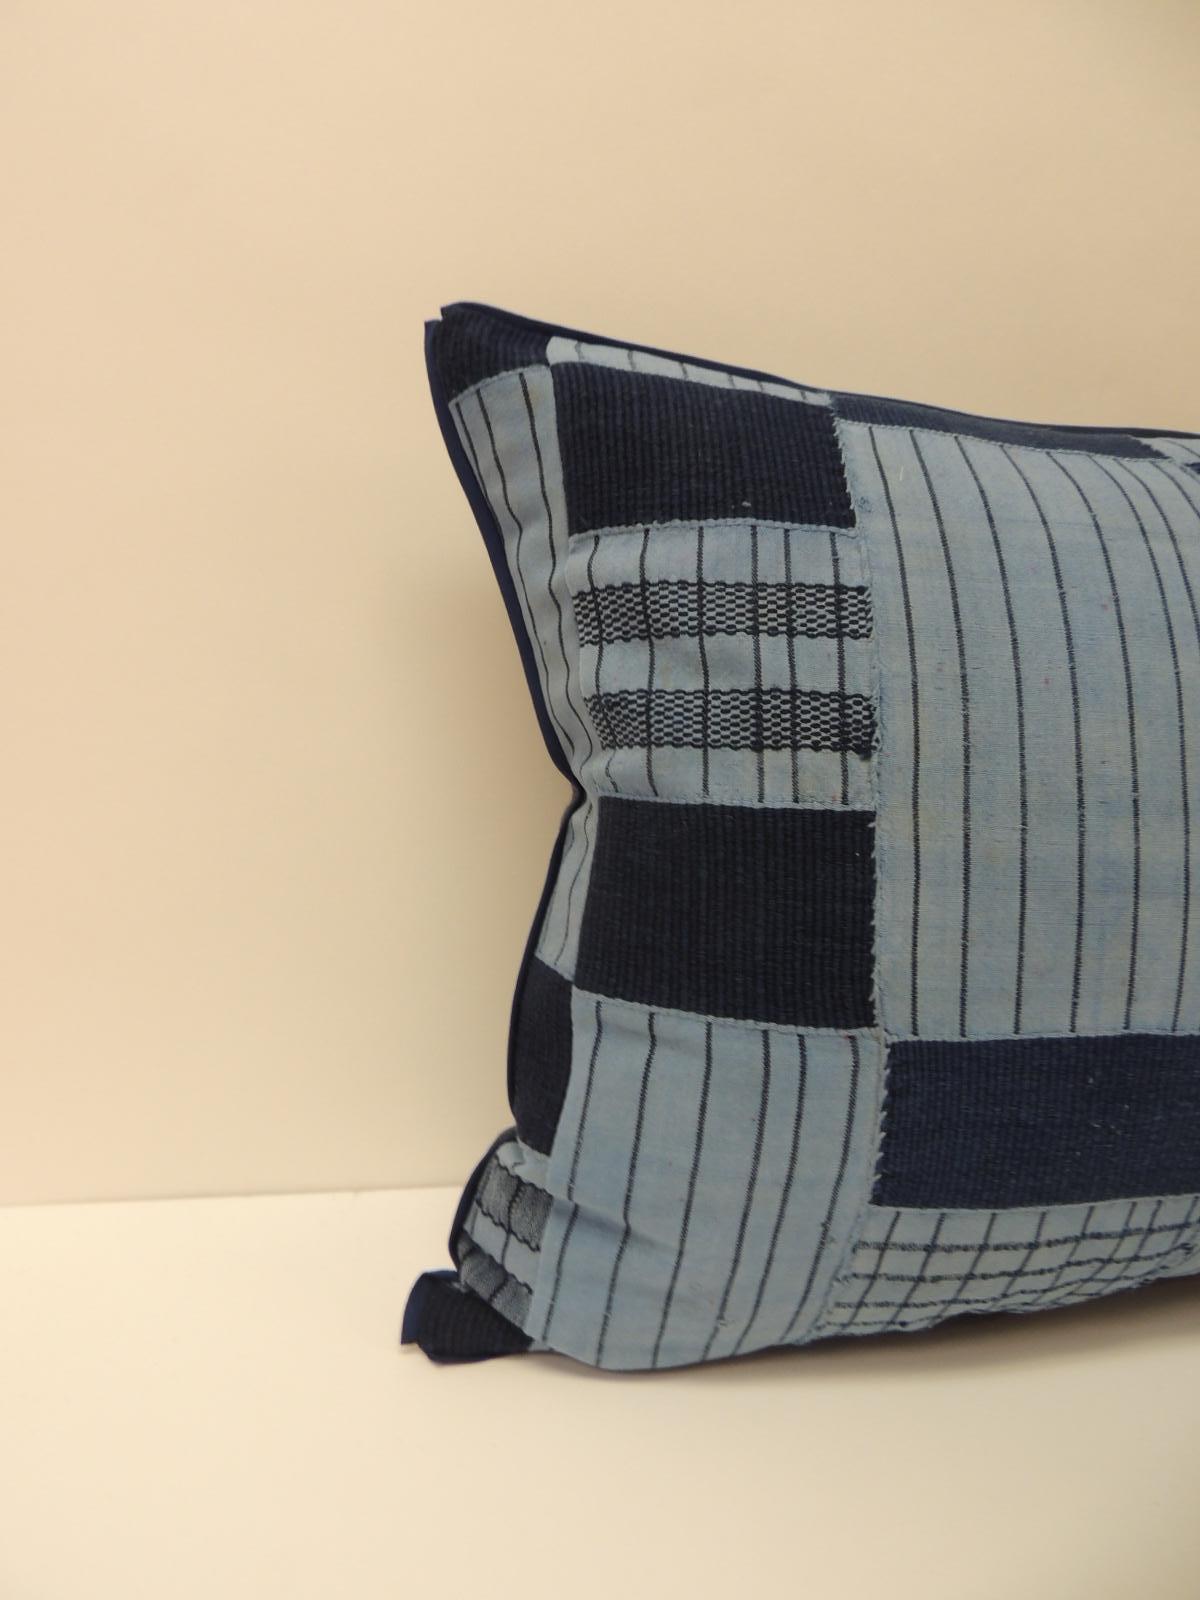 Vintage indigo and blue African woven and embroidered checkerboard pattern decorative lumbar pillow. Throw pillow handcrafted with a vintage textile from the artisanal fiber arts traditions of Africa. Decorative lumbar pillow finished with navy blue